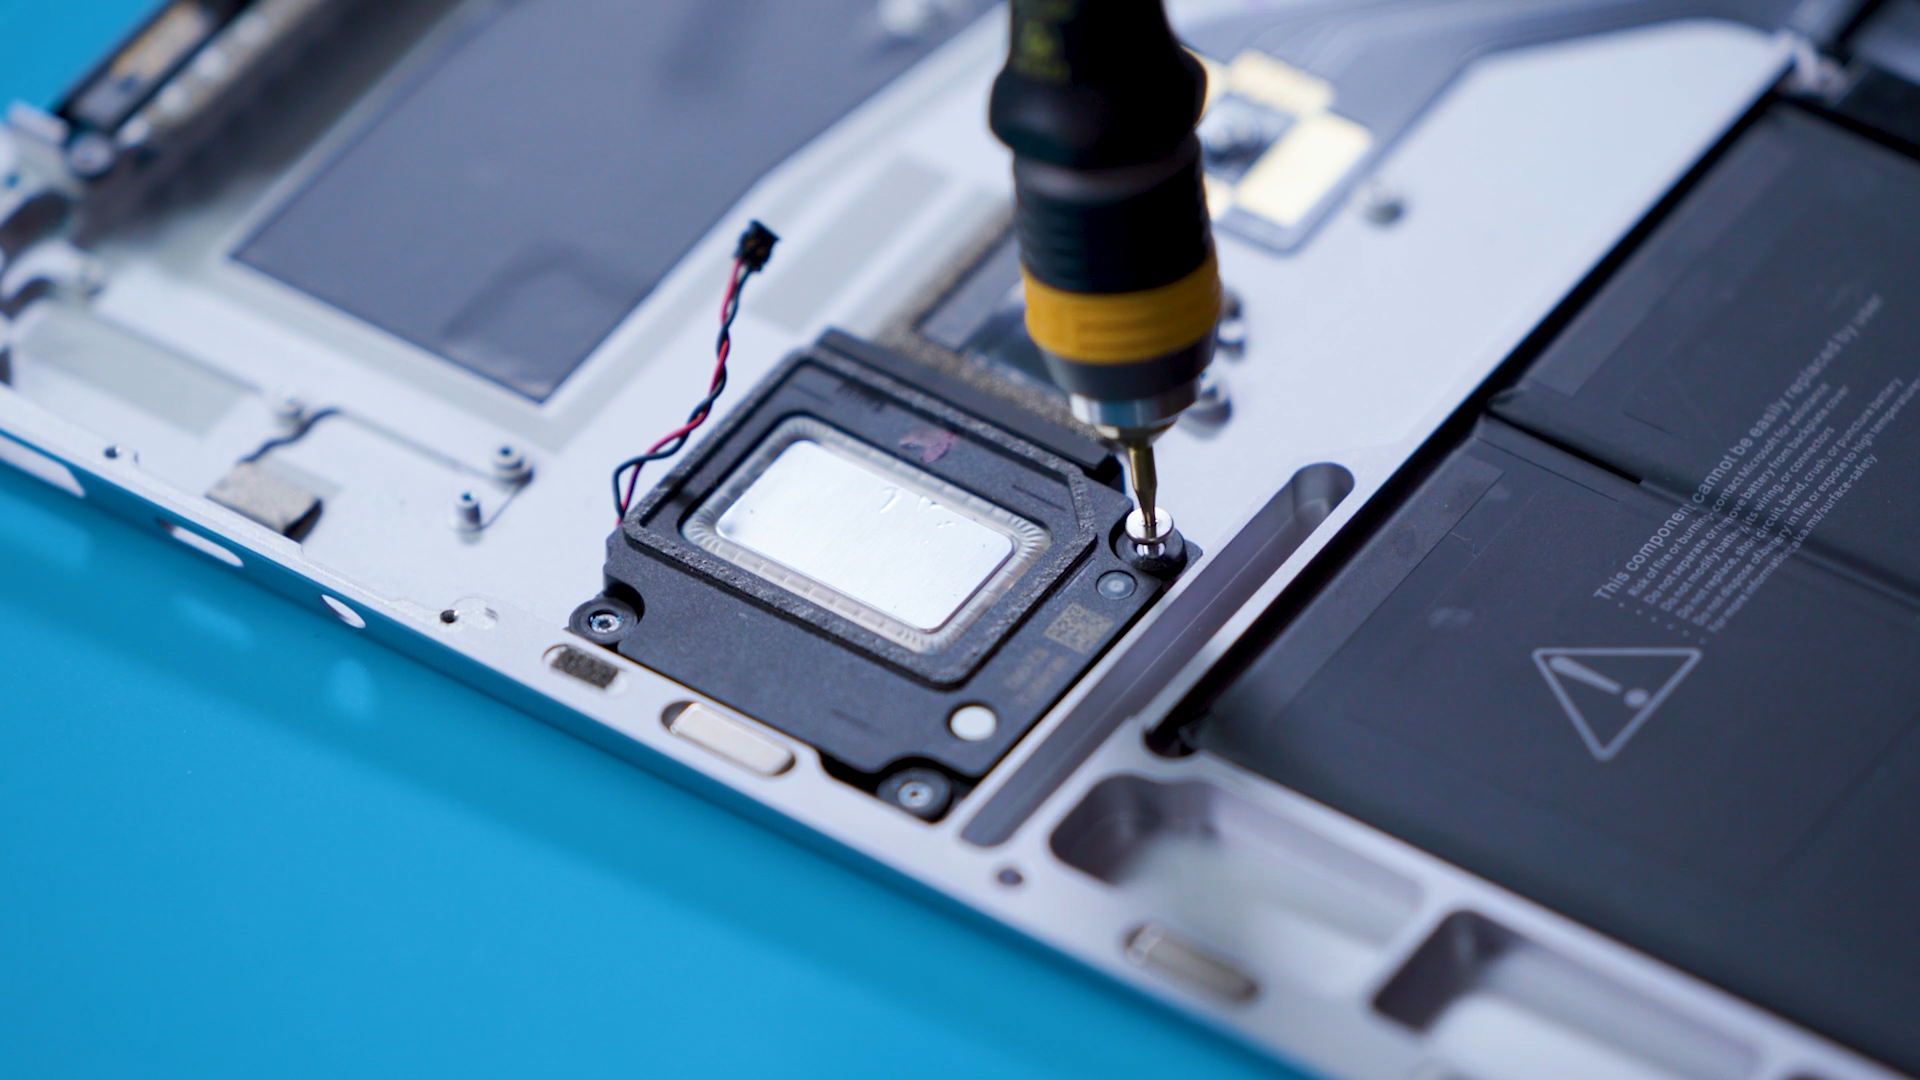 Microsoft Surface Pro 2 LCD Display Replacement - iFixit Repair Guide